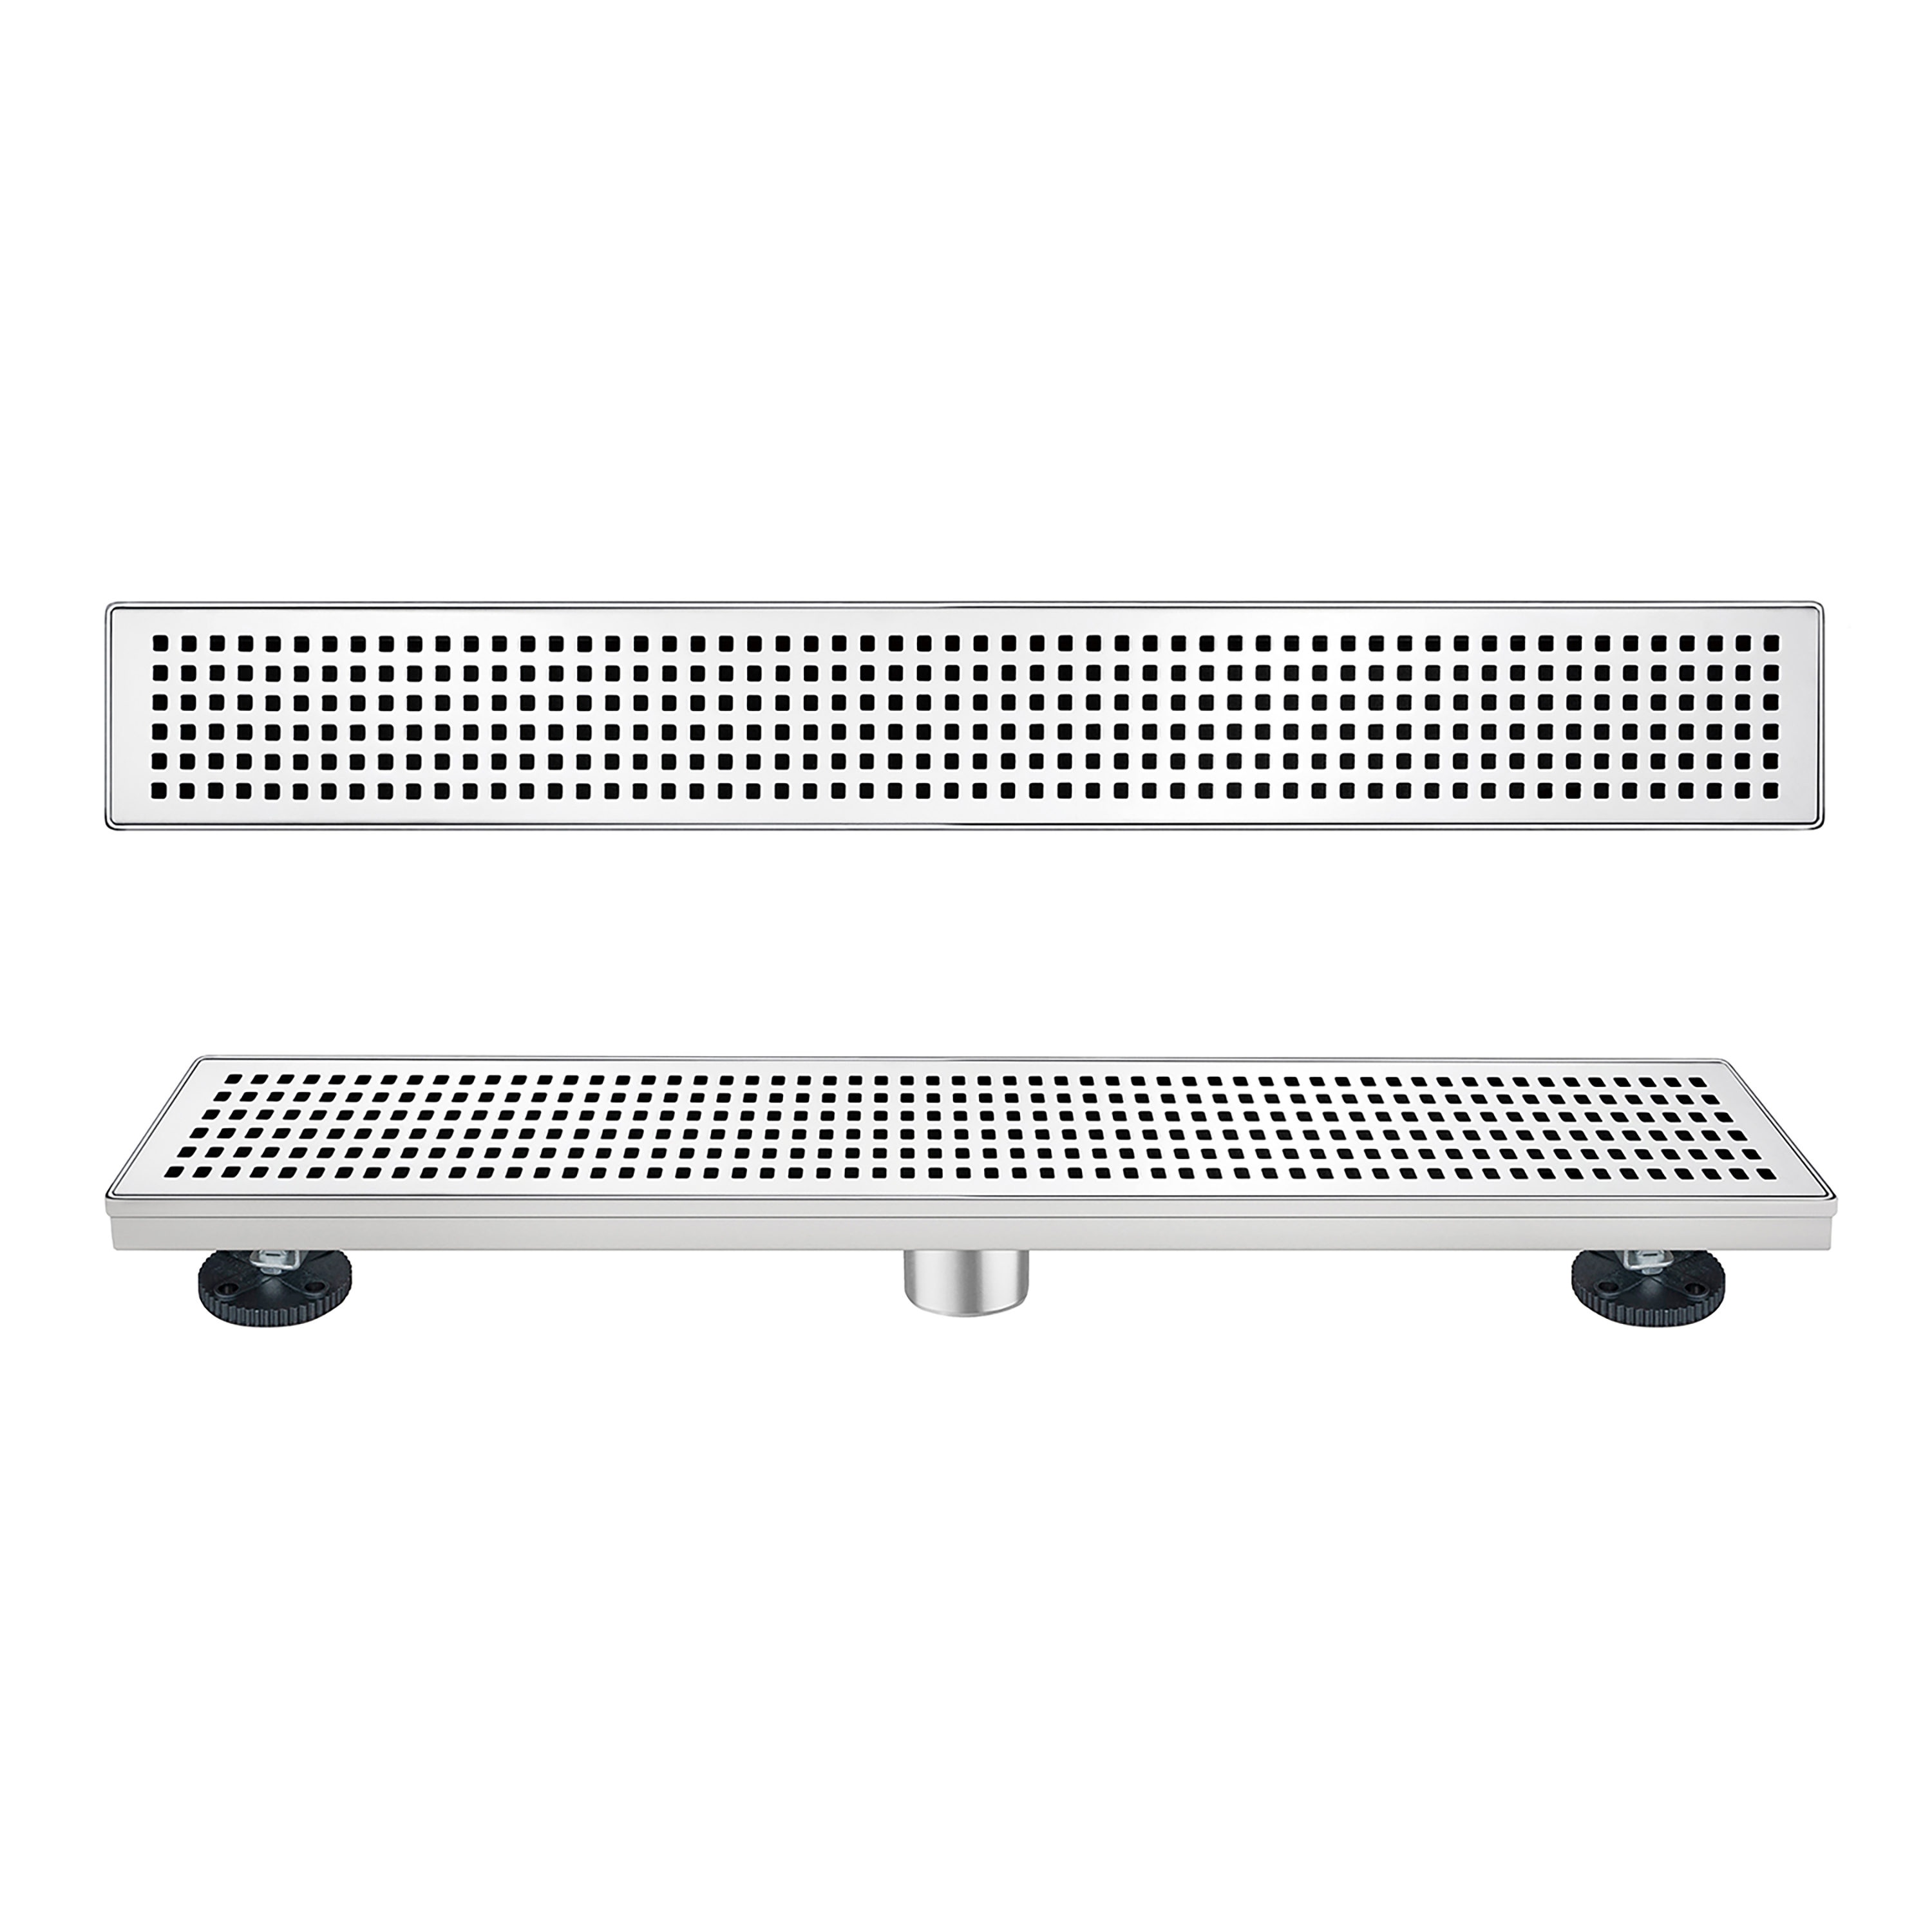 Elegante Drain Collection 28 in. Linear Stainless Steel Shower Drain with Square Hole Pattern, Matte Black